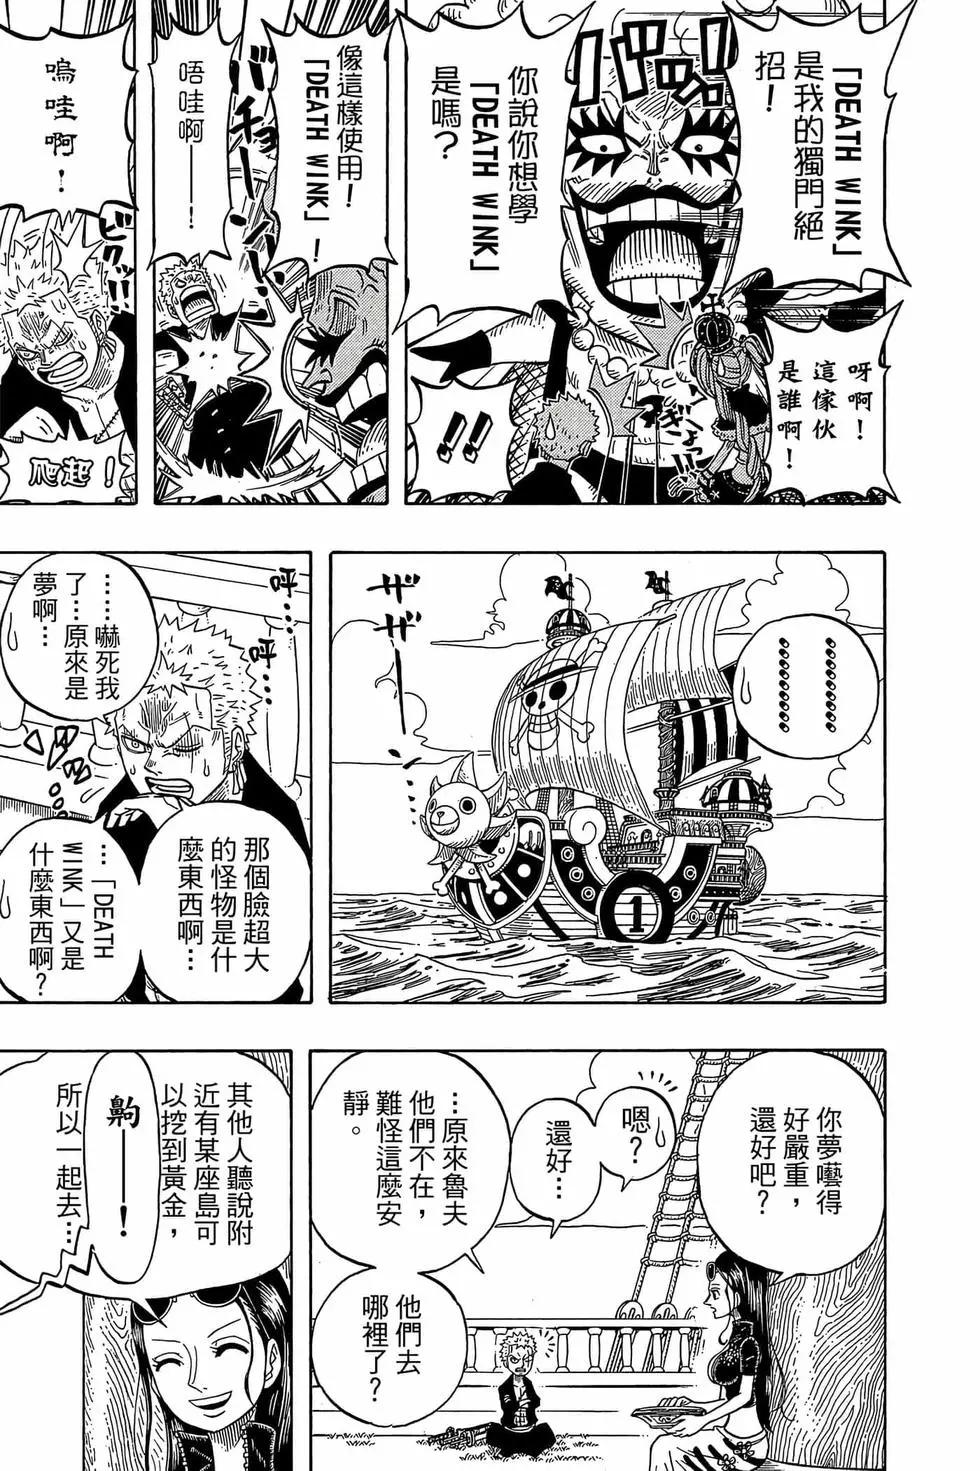 One piece party - 第01卷(3/4) - 2